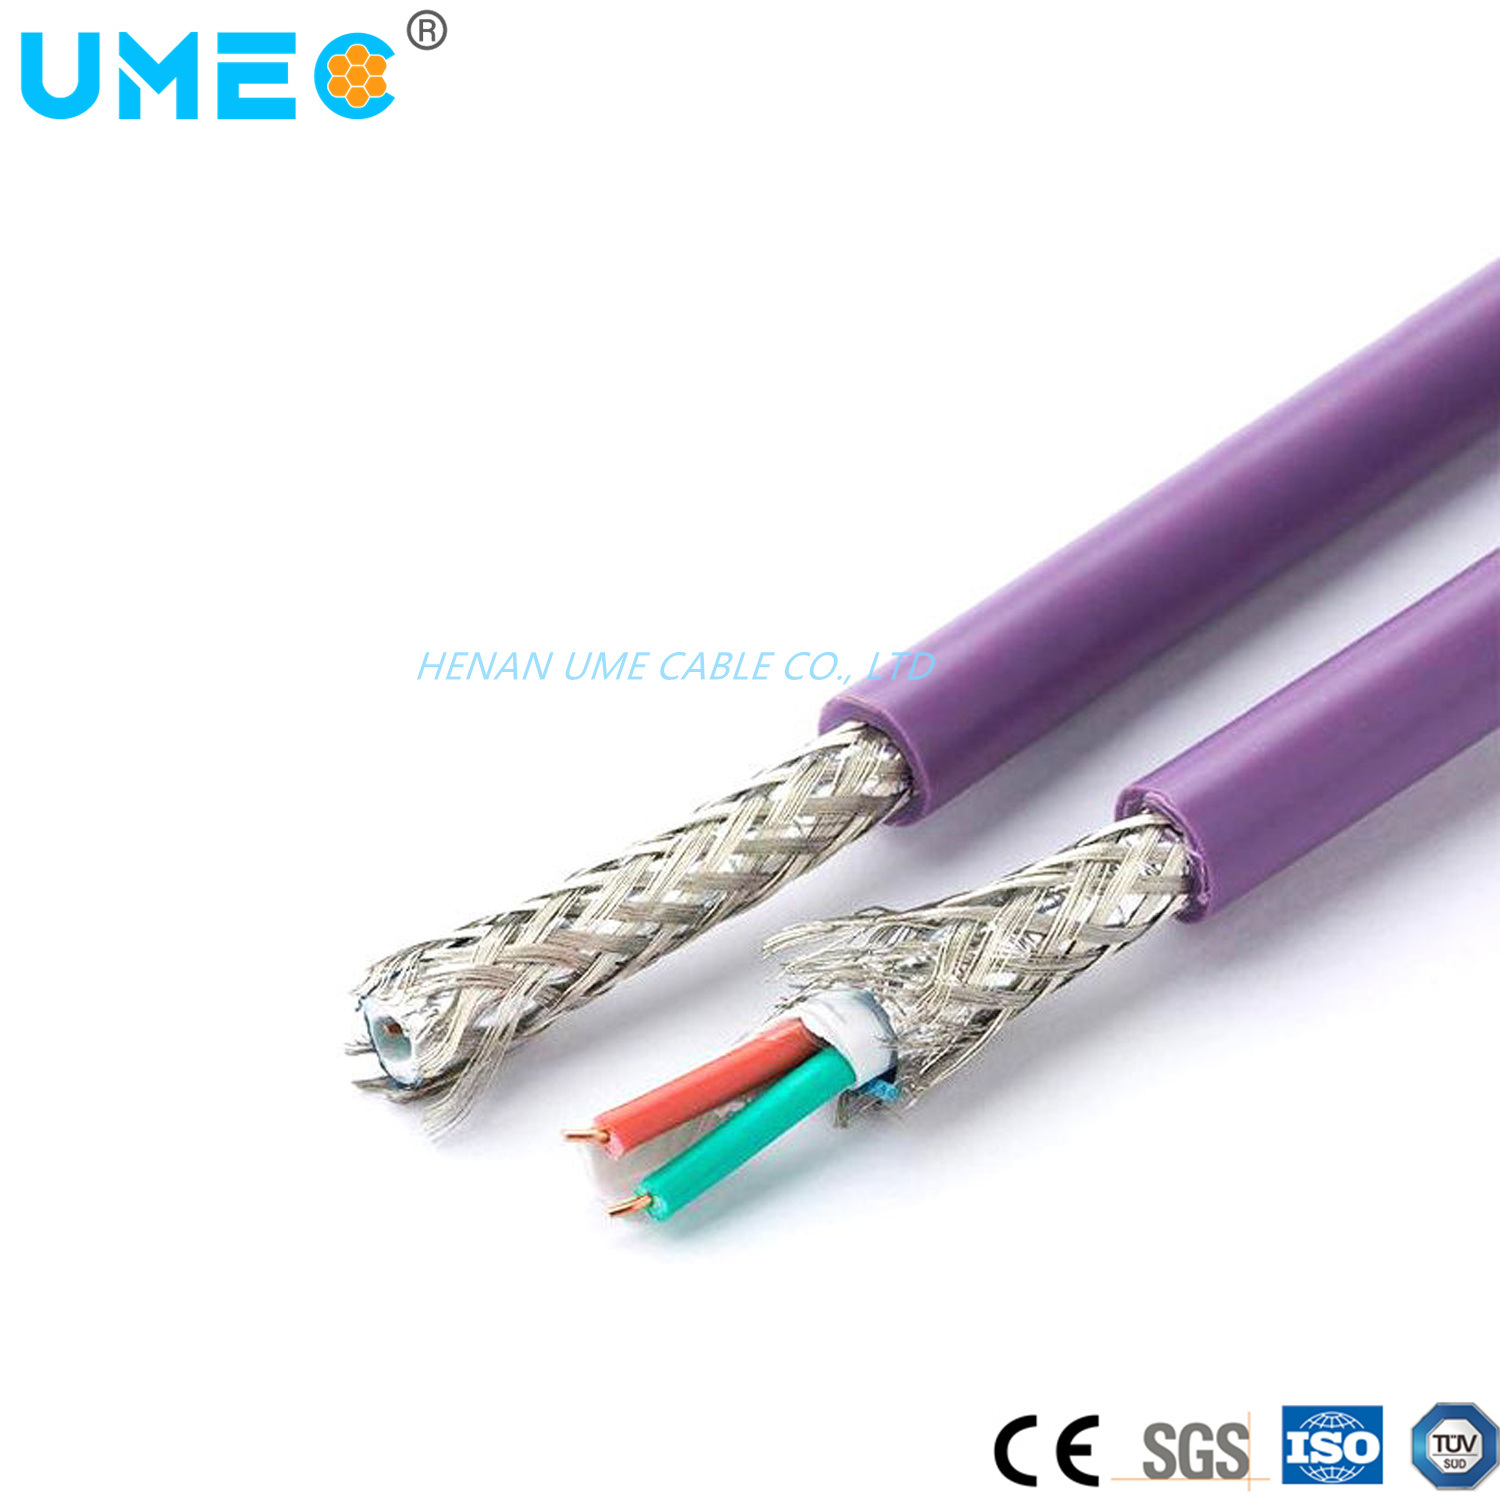 Stranded Copper Cable Flexible Field Communication Cable Siemens 6xv1830-0eh10 Cable